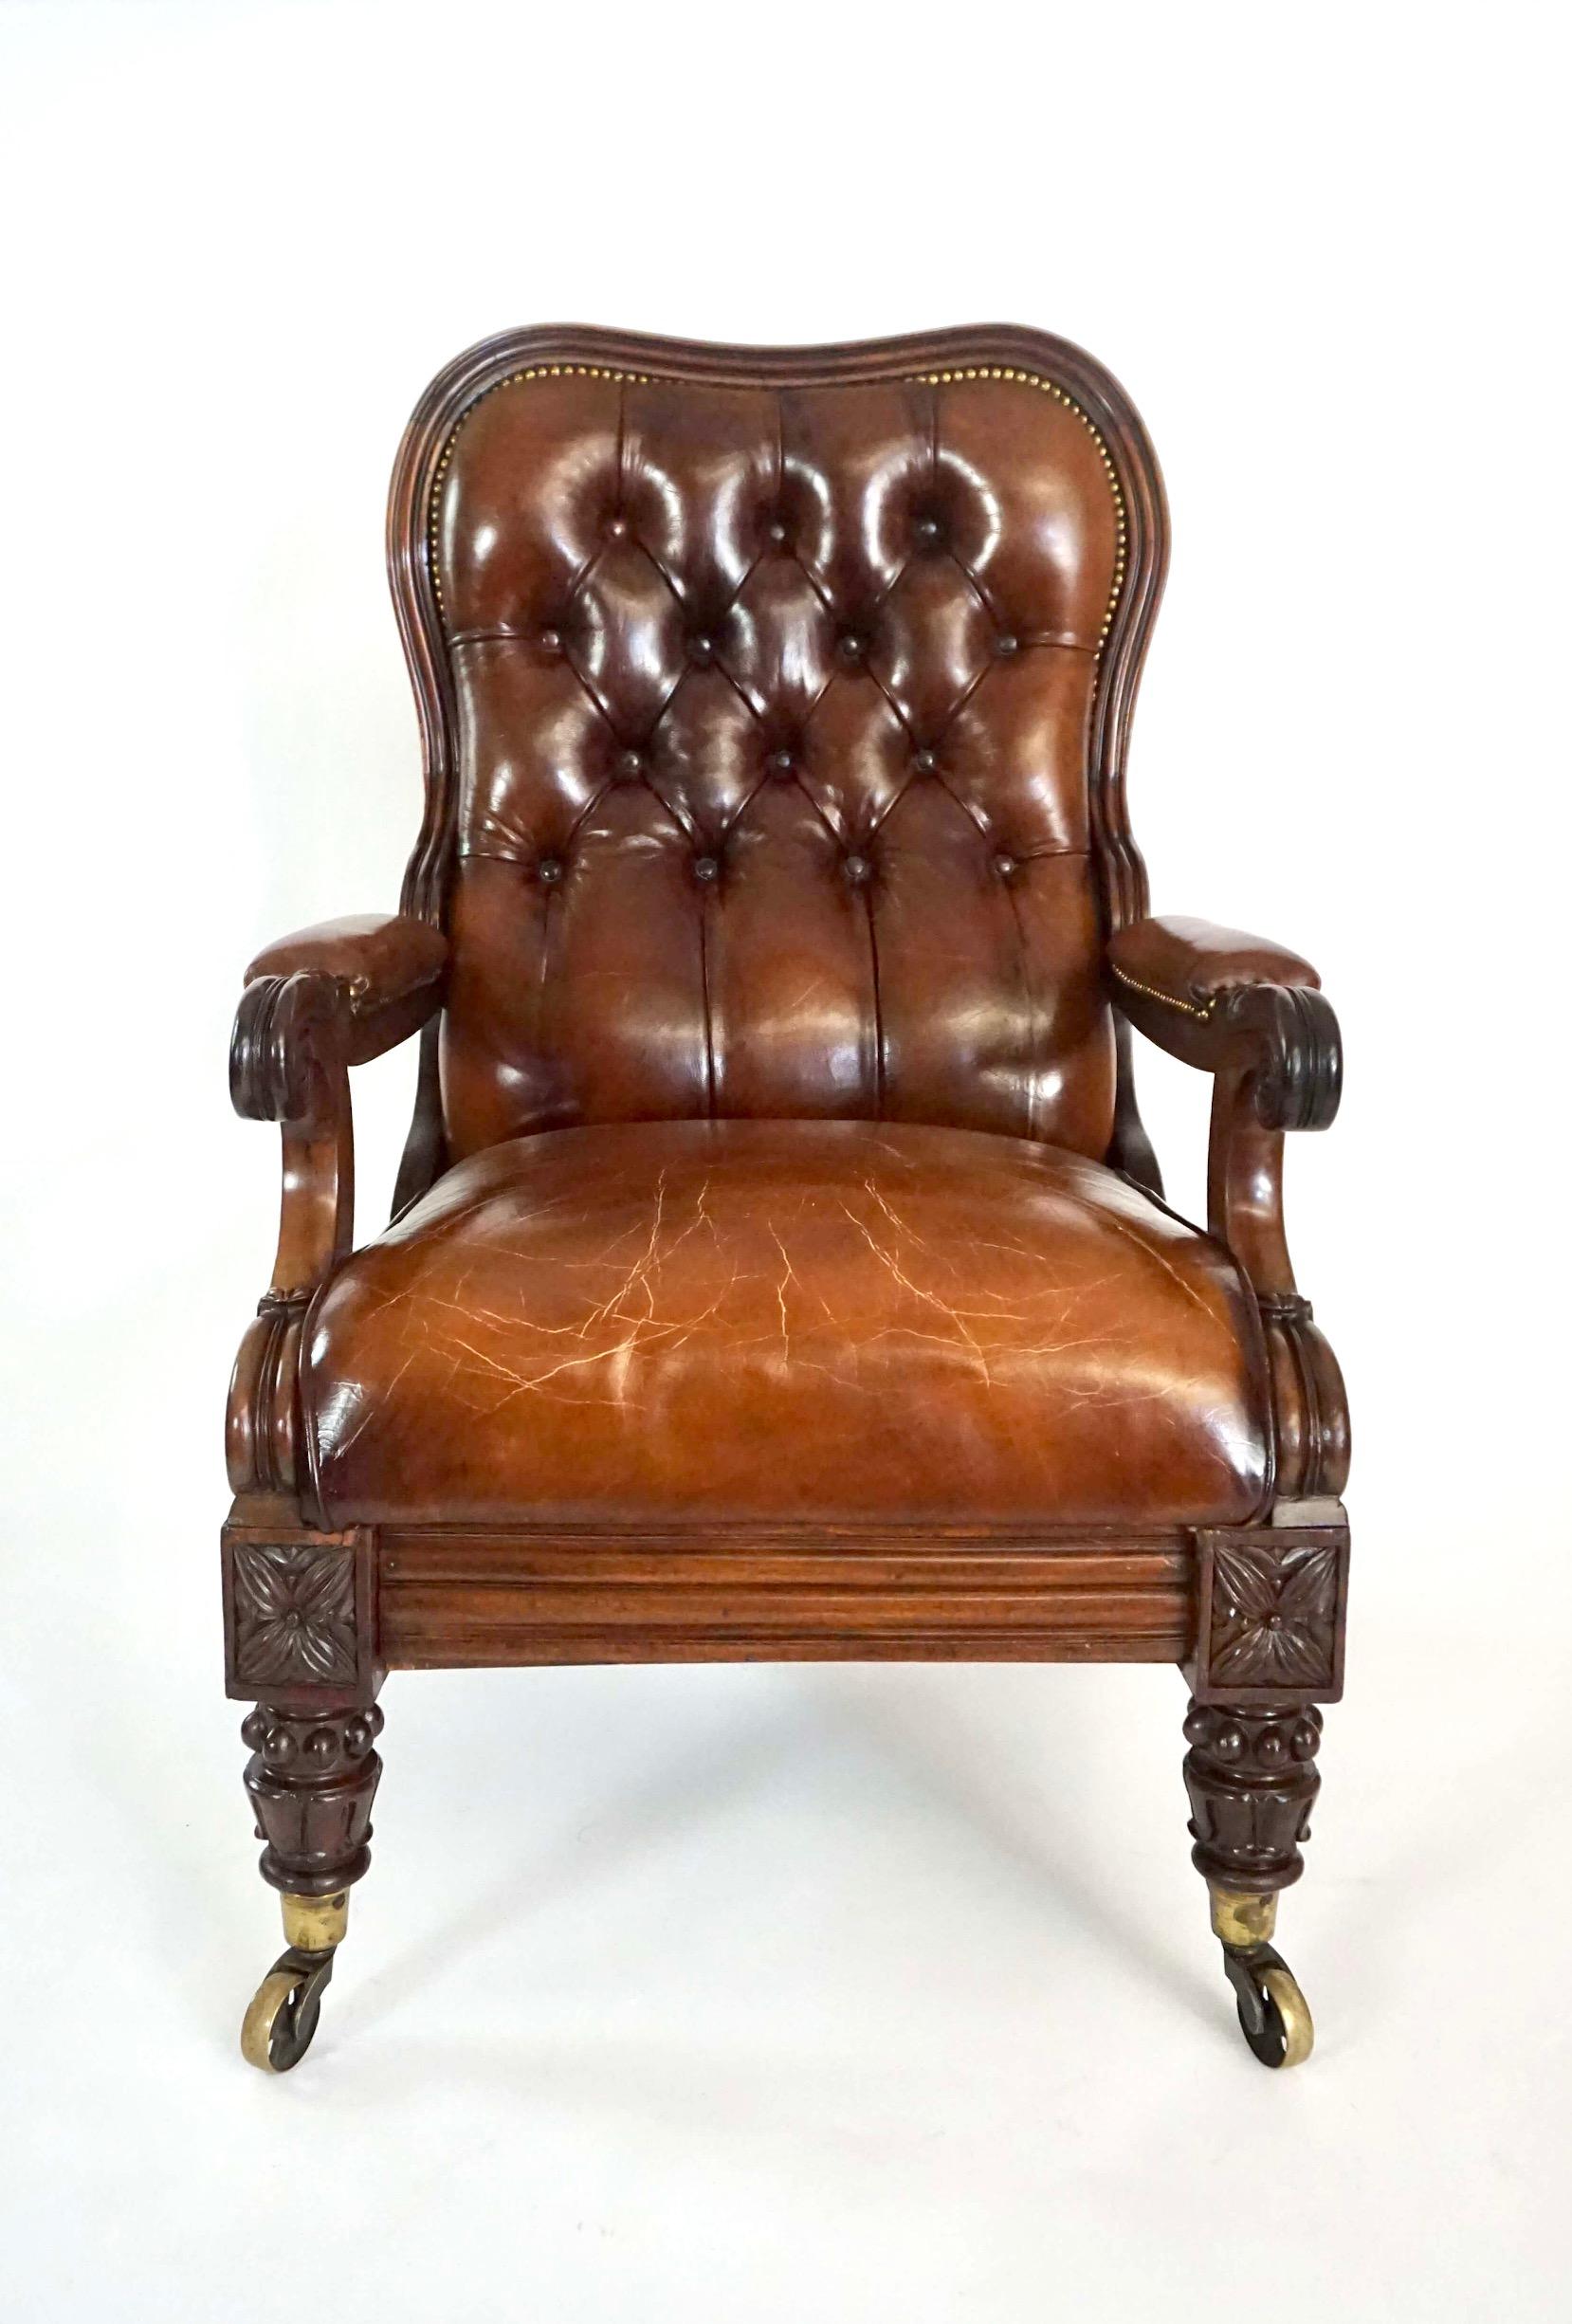 British Regency Leather Upholstered Mahogany Reclining Armchair, circa 1830 For Sale